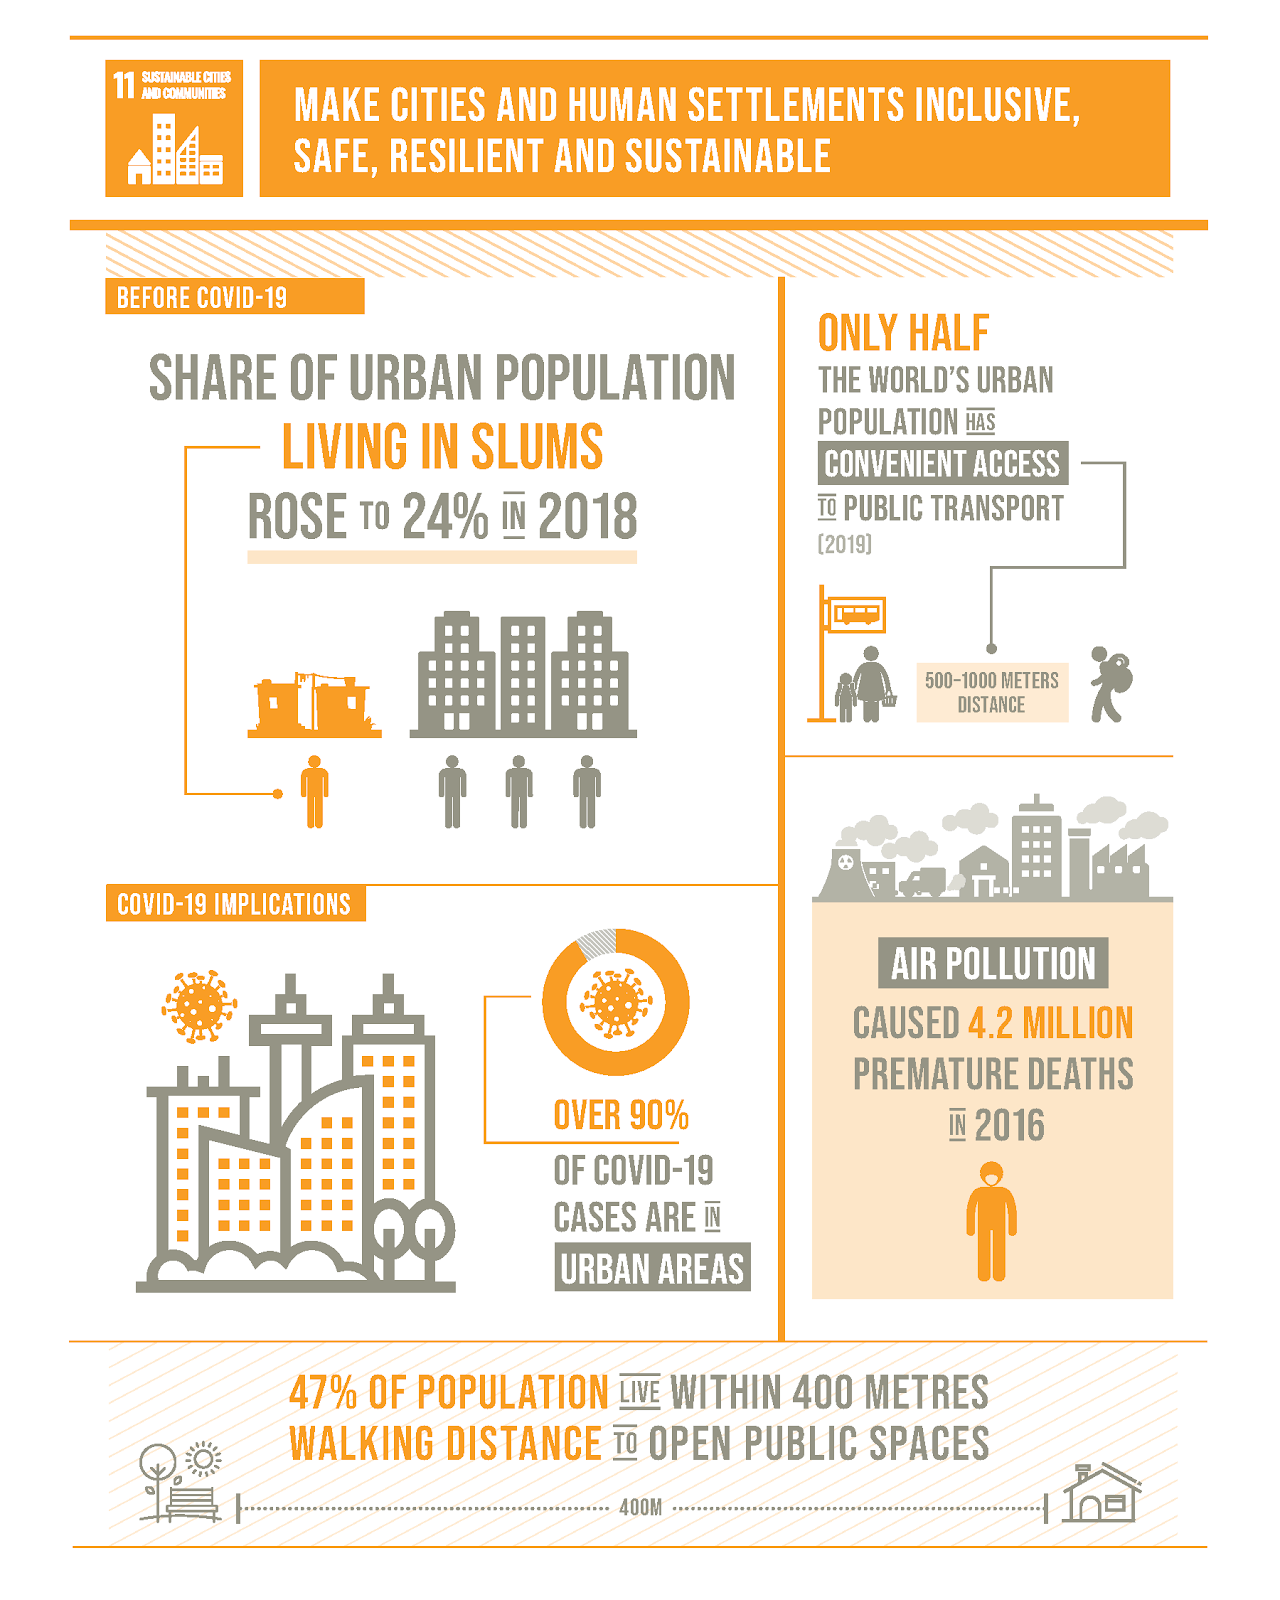 As we battle with the world's most overpopulated cities, SDG11 pushes for the development of cities and human settlements to become healthy, resilient, and inclusive.